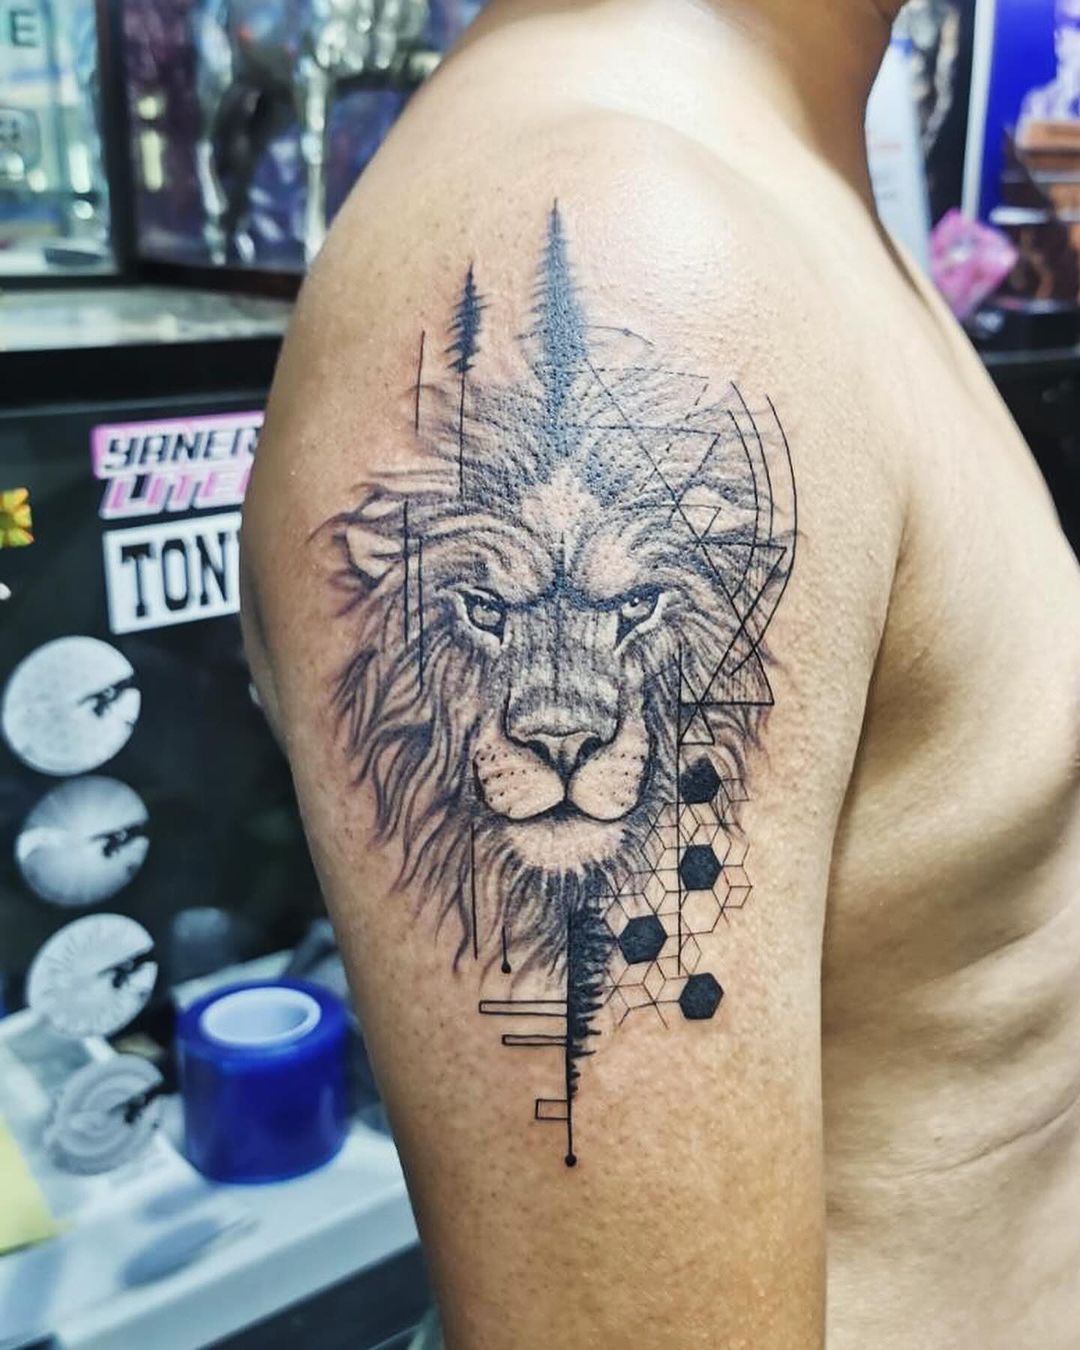 Tattoo uploaded by MILD TATTOO STUDIO KOH PHI PHI THAILAND  The  traditional bamboo tattoo Professional artists Maintaining the highest  standards of quality All of our work is considered premium class and